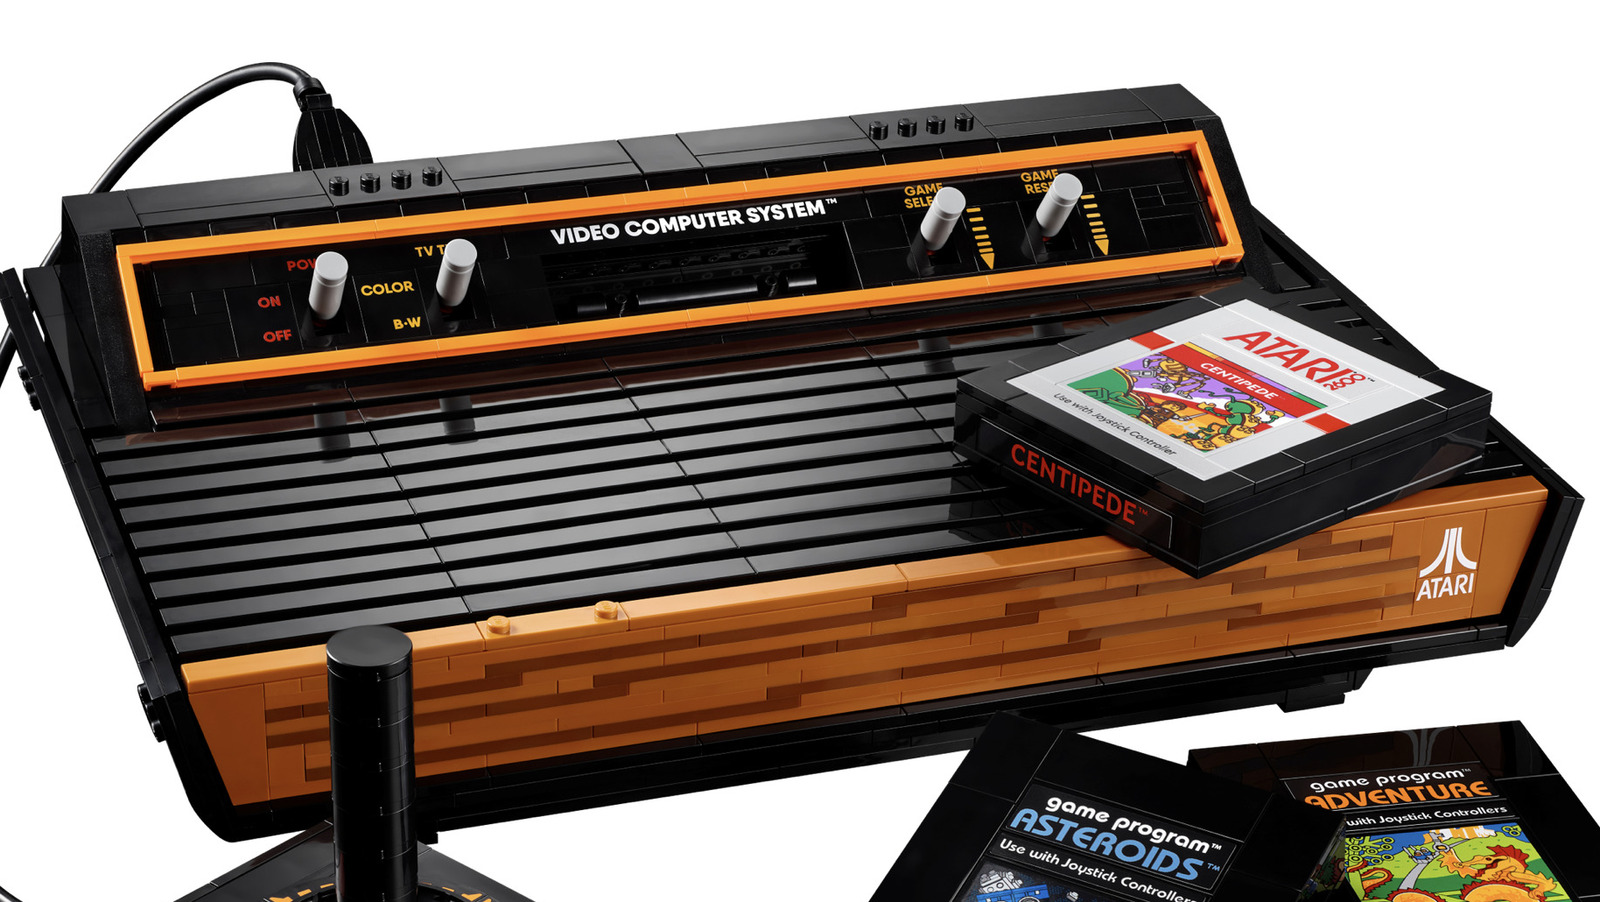 We Build the LEGO Atari 2600 Console and It Contains A Hidden Secret - IGN